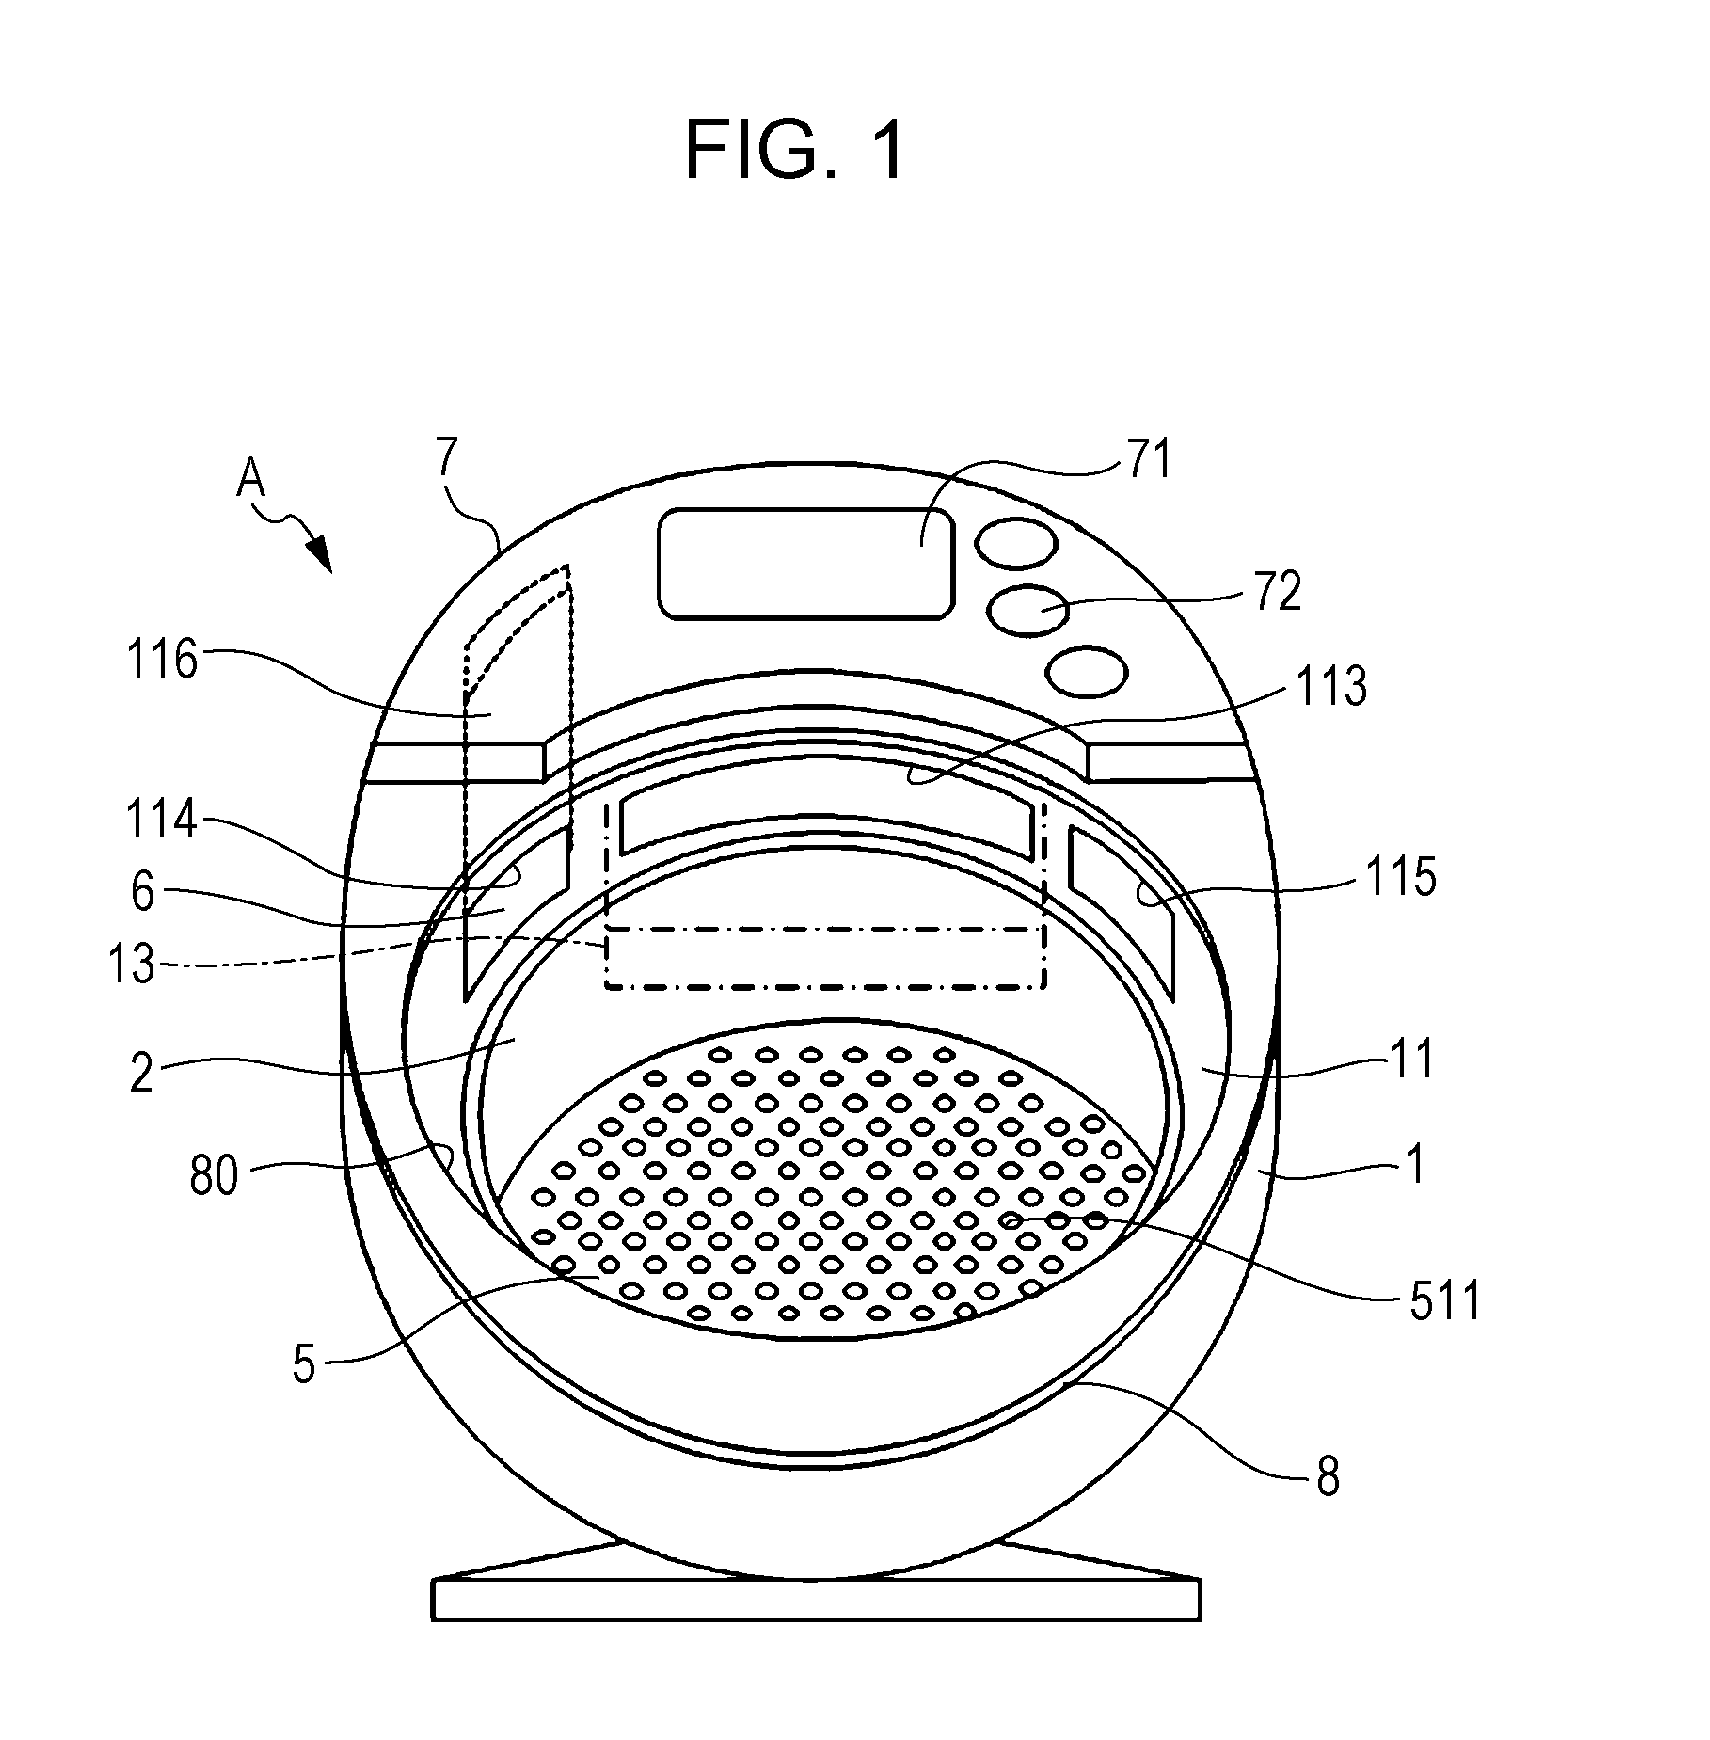 Cooking device